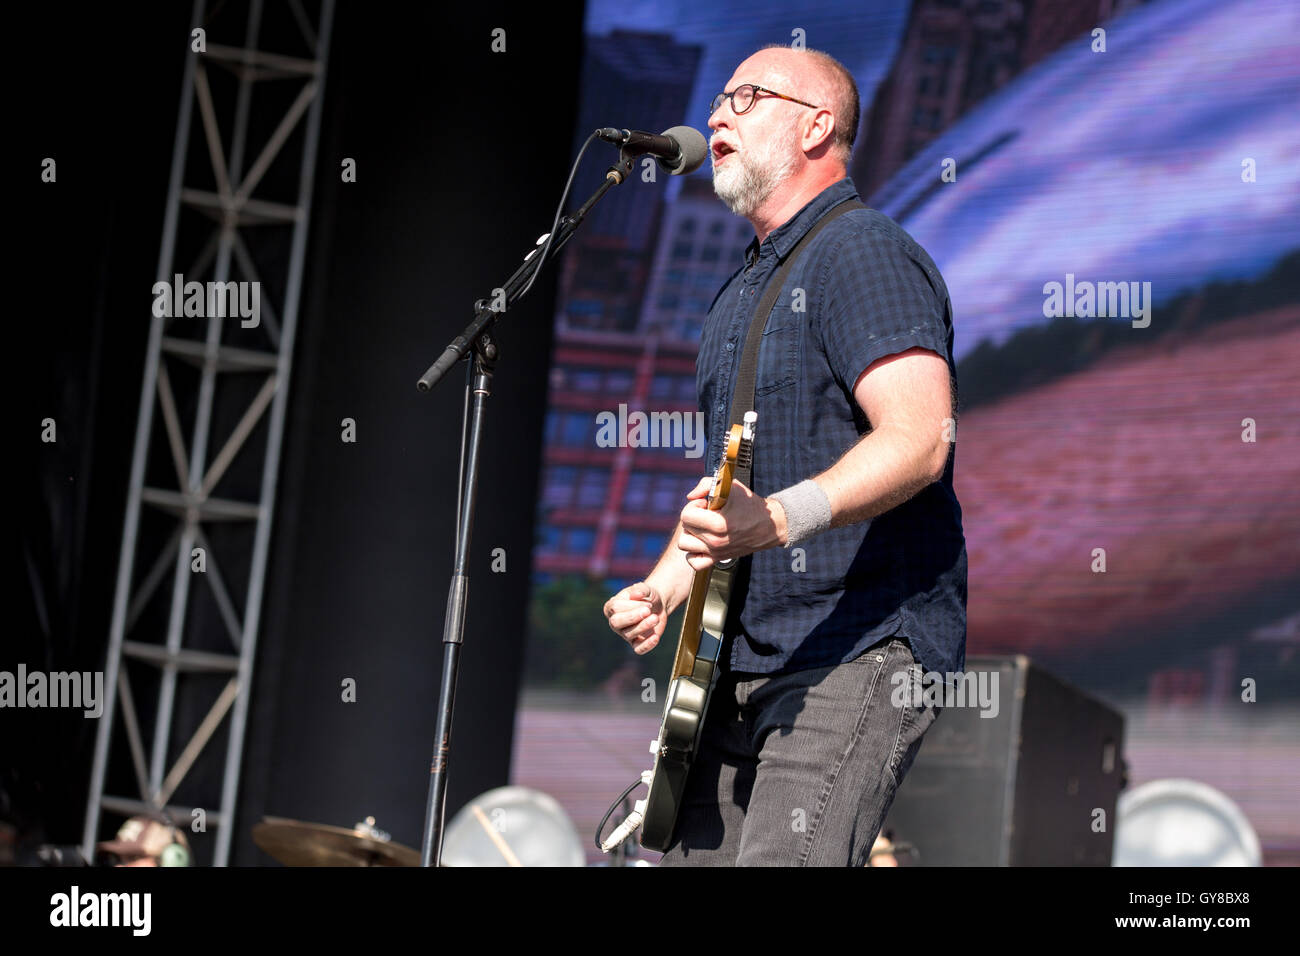 Chicago, Illinois, USA. 17th Sep, 2016. JESSE LACEY of Brand New performs  live at Douglas Park during Riot Fest in Chicago, Illinois © Daniel  DeSlover/ZUMA Wire/Alamy Live News Stock Photo - Alamy